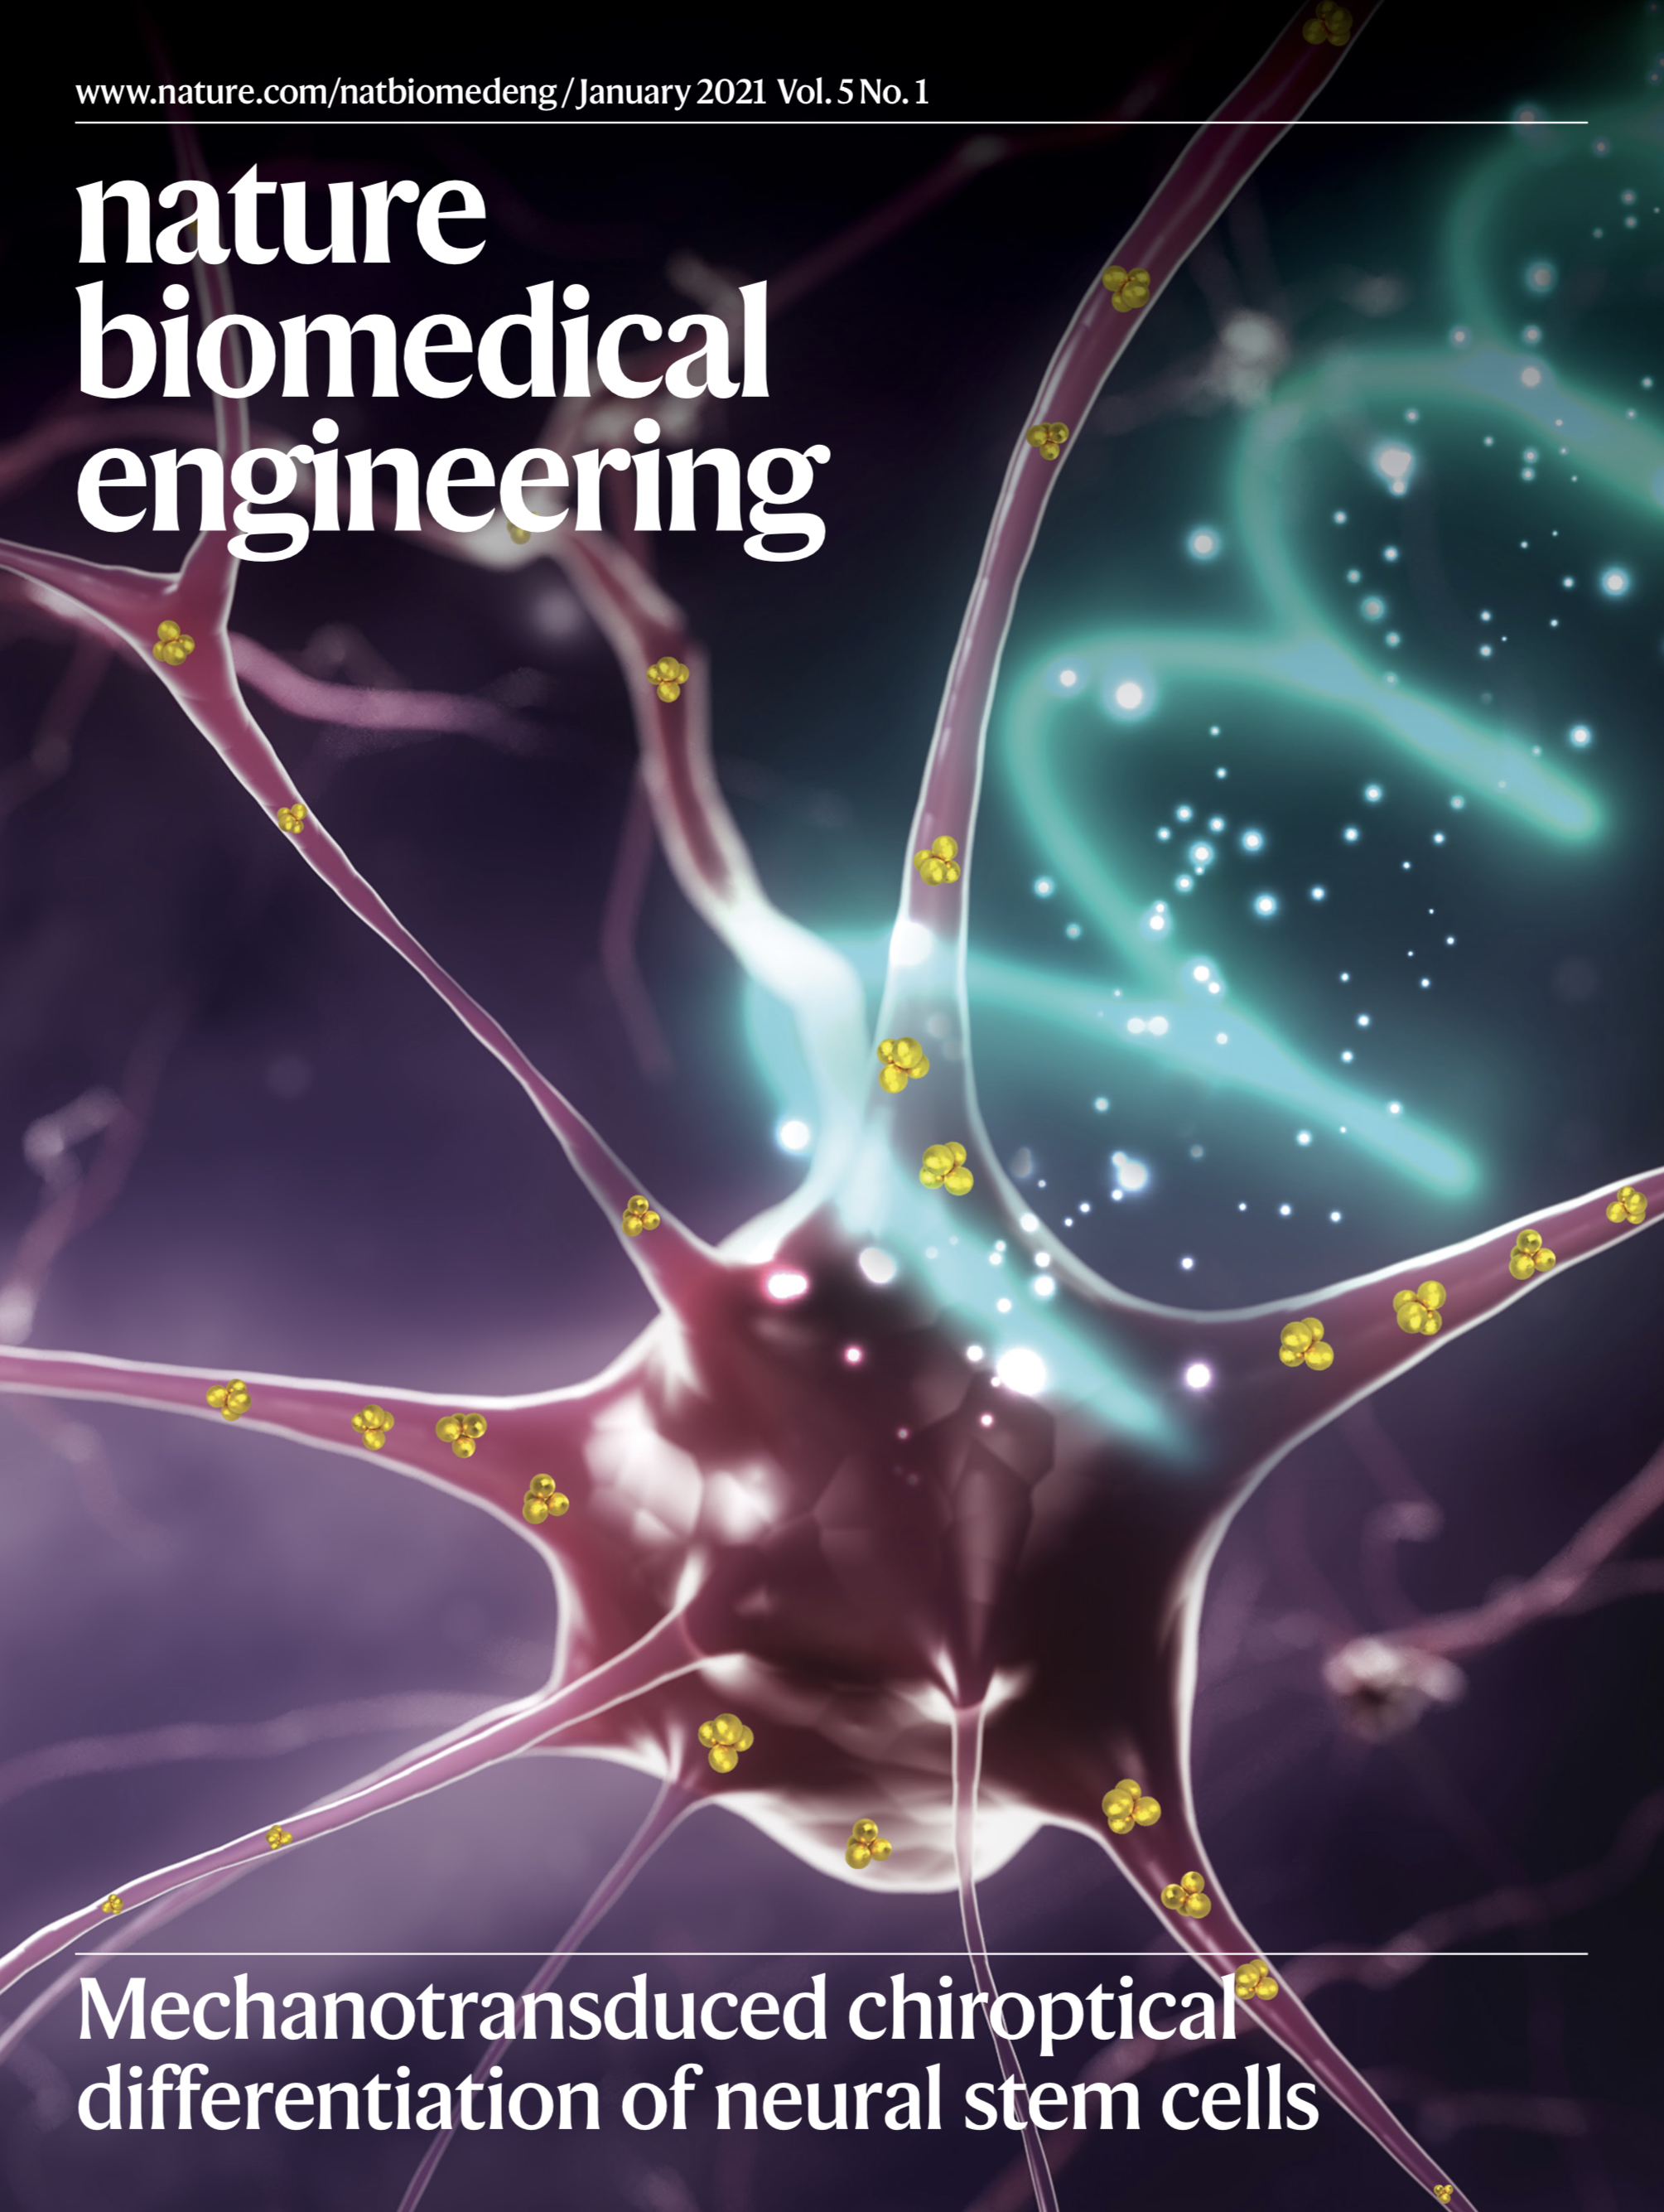 Nature Biomedical Engineering on Twitter: "The January cover illustrates the differentiation of neural stem cells the transduction of photons into force DNA-bridged chiral assemblies of gold nanoparticles entangled with